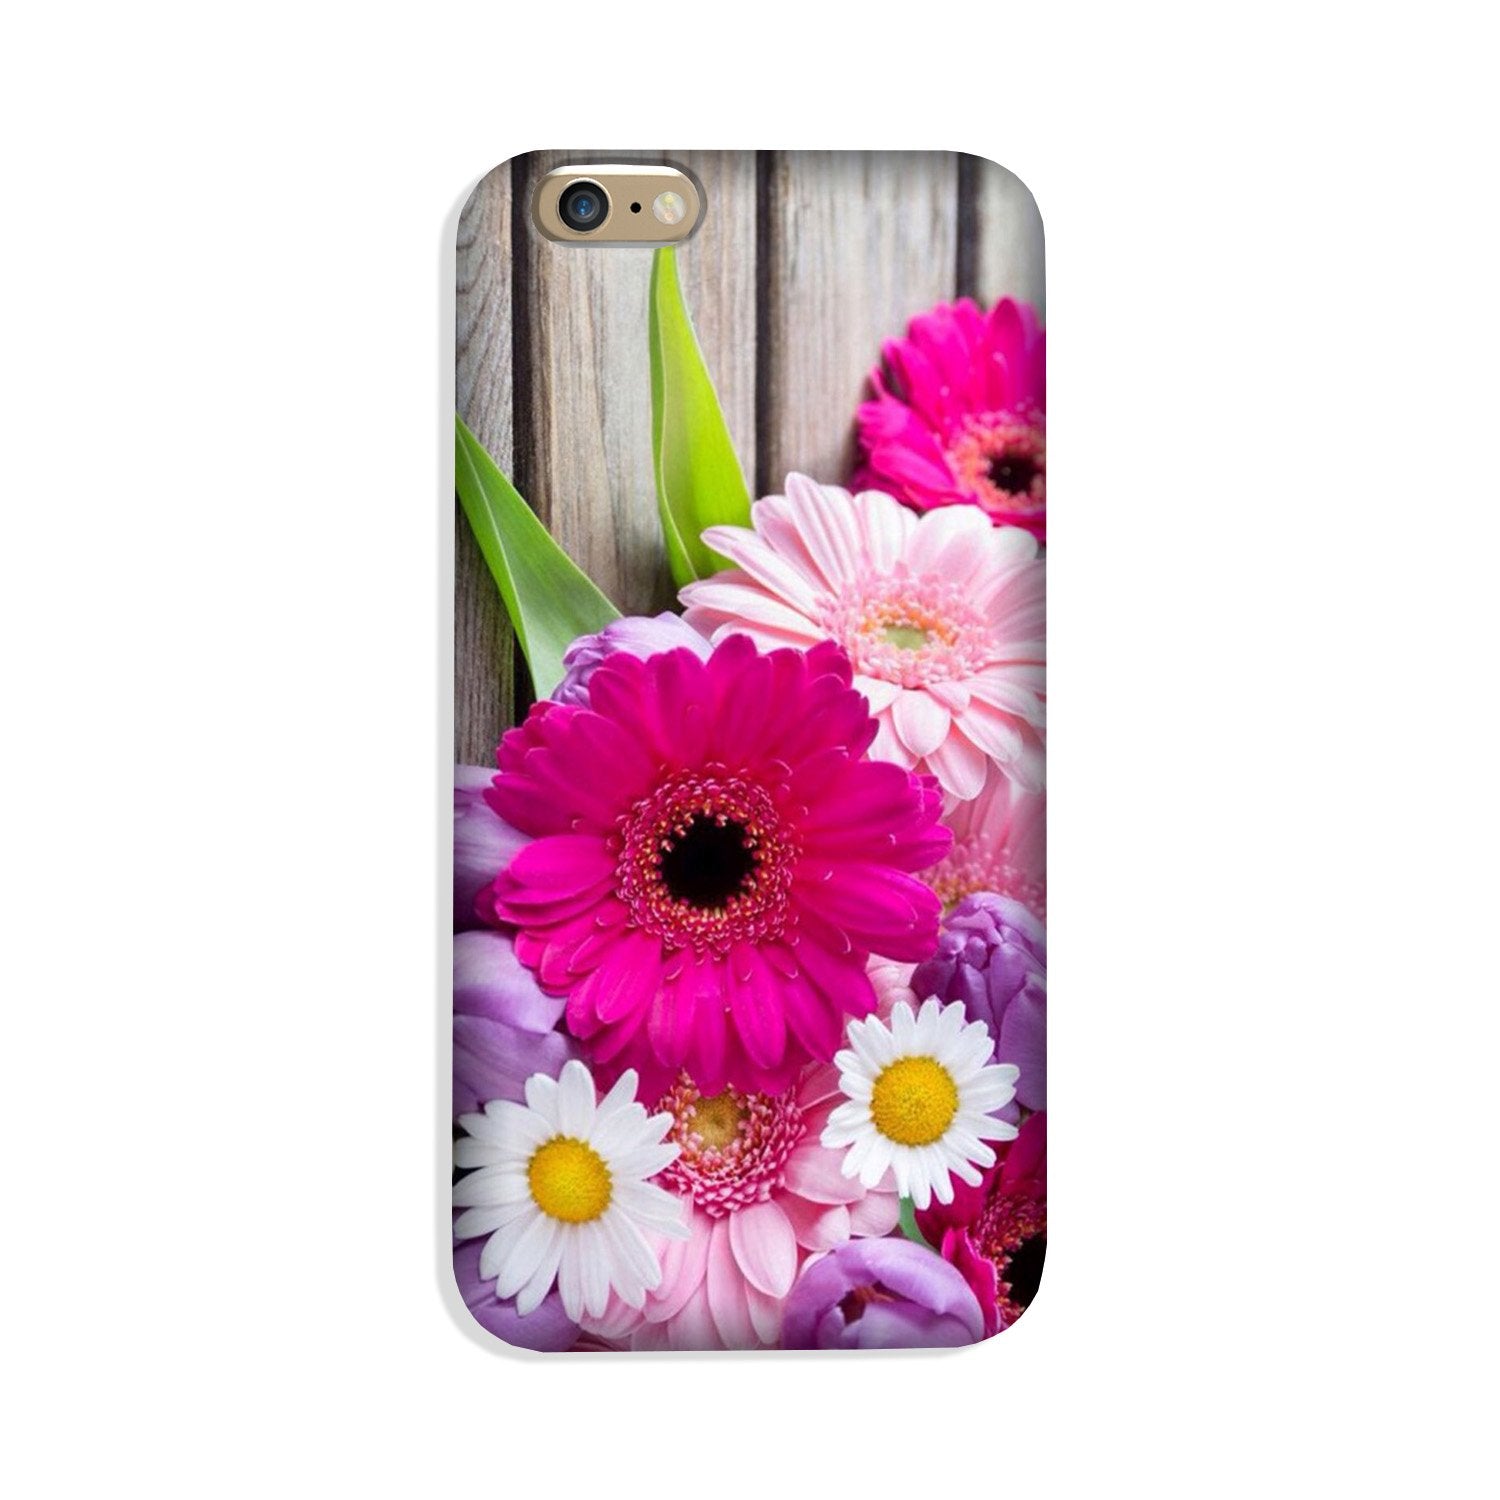 Coloful Daisy2 Case for iPhone 8